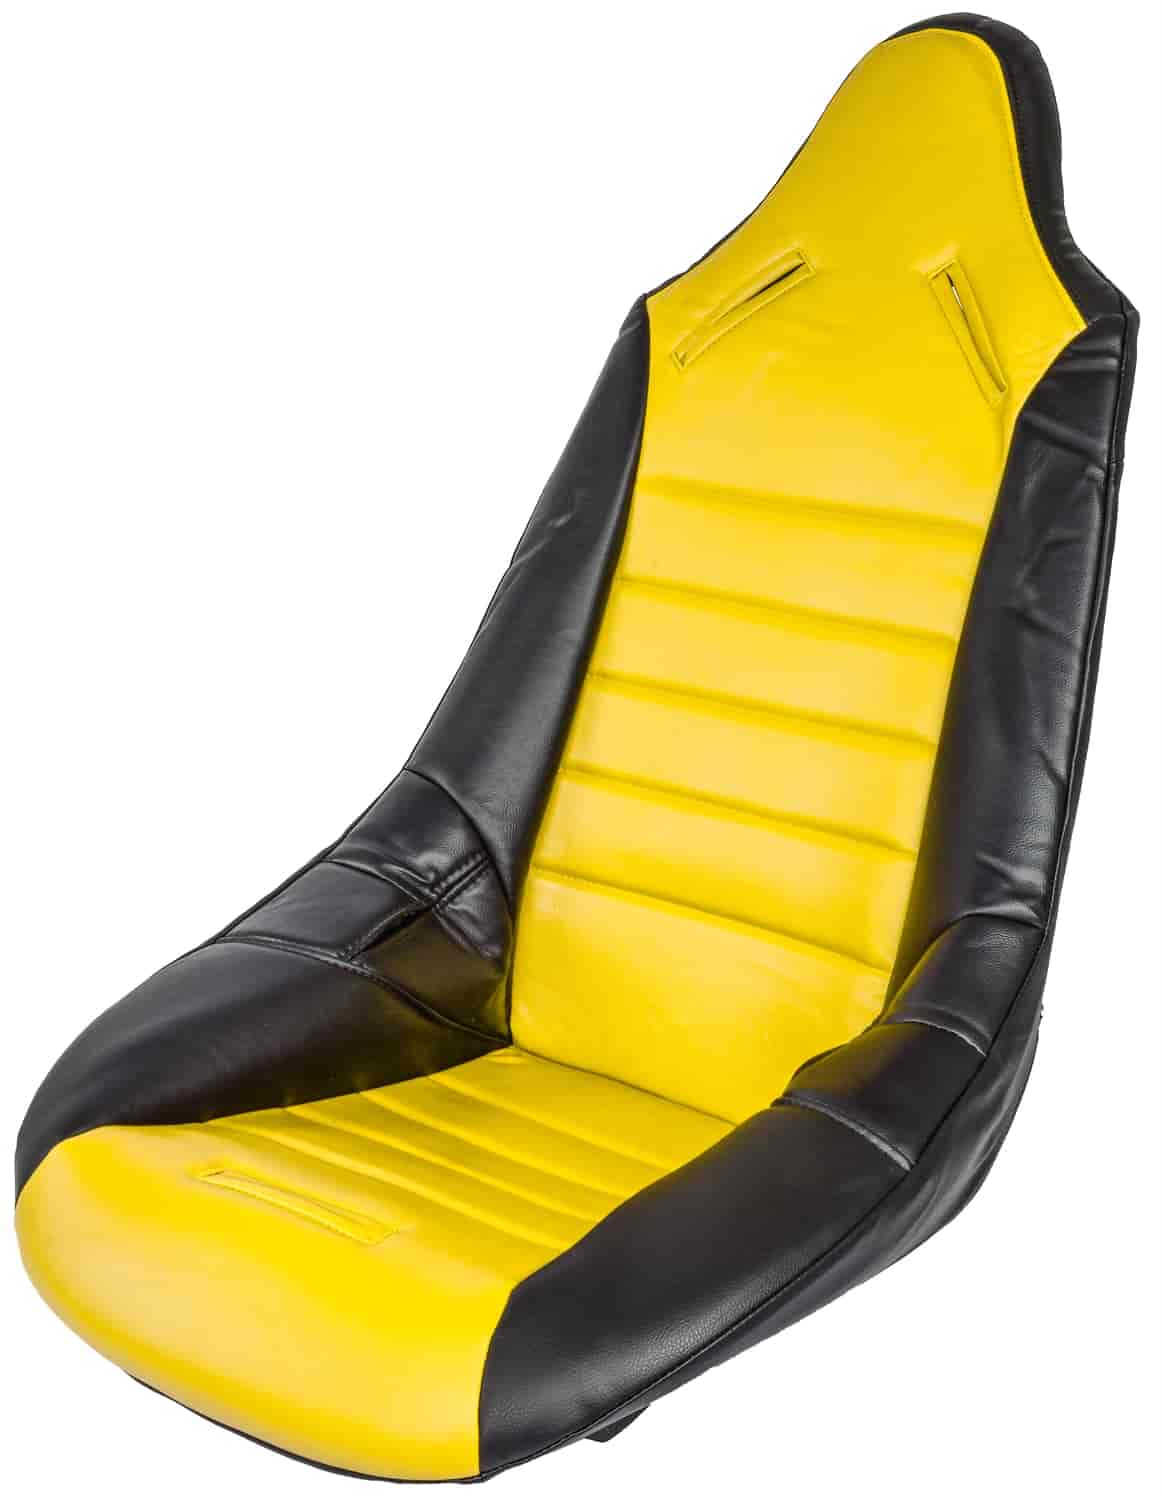 Pro High Back II Vinyl Seat Cover Yellow with Black Trim